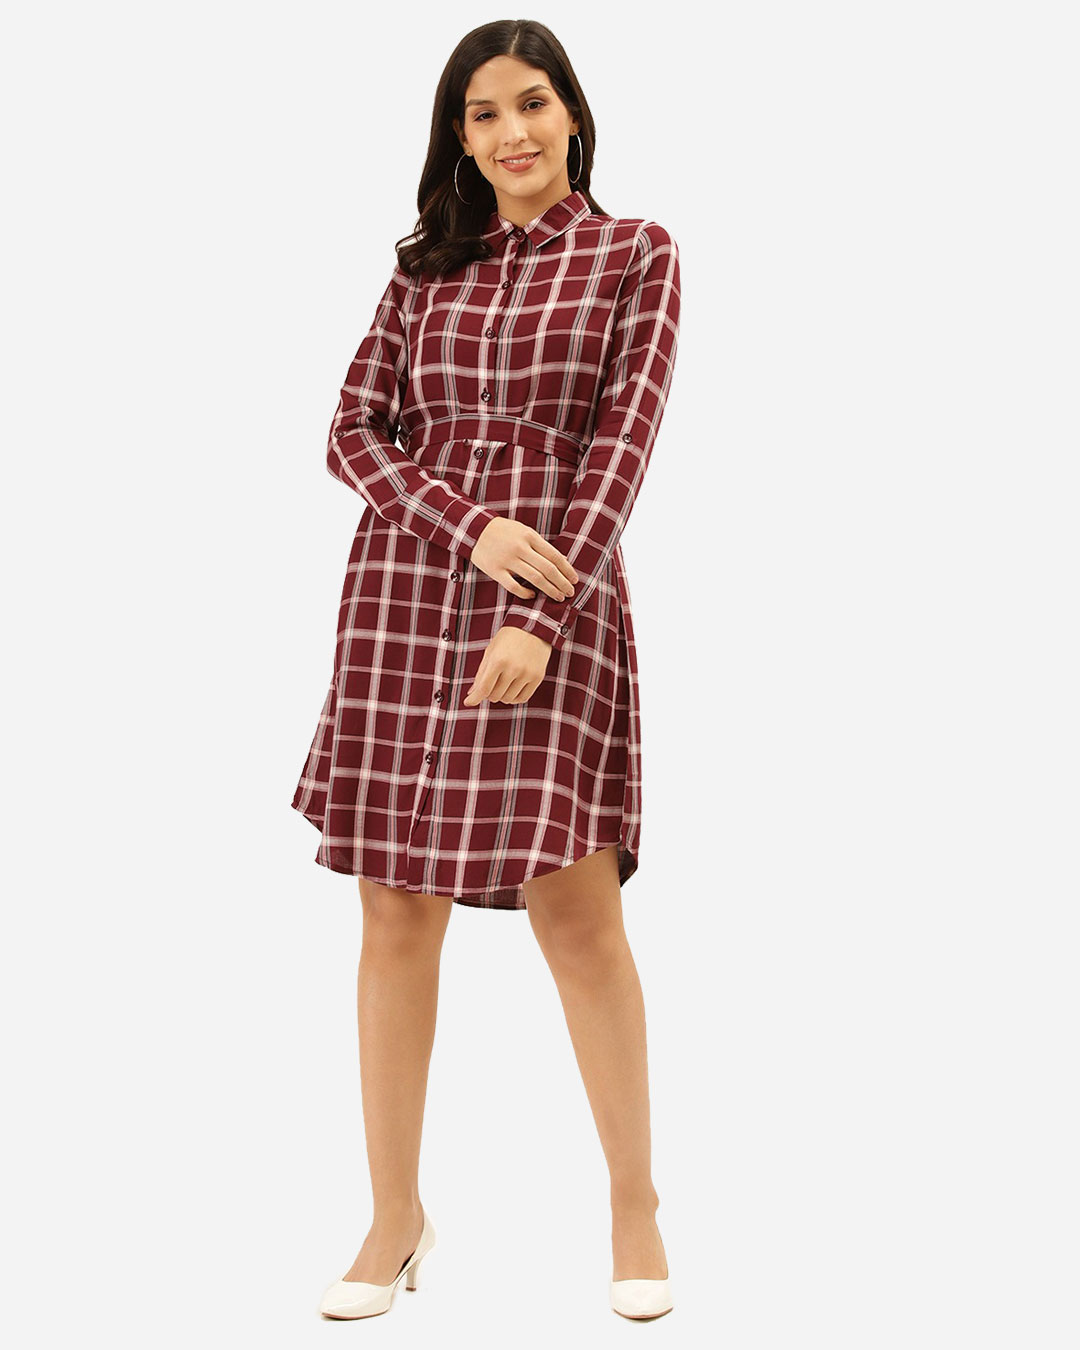 Women's Red and White Check Shirt Dress with Belt - StyleStone | Western  dresses for women, Checked shirt dress, Western dresses for girl